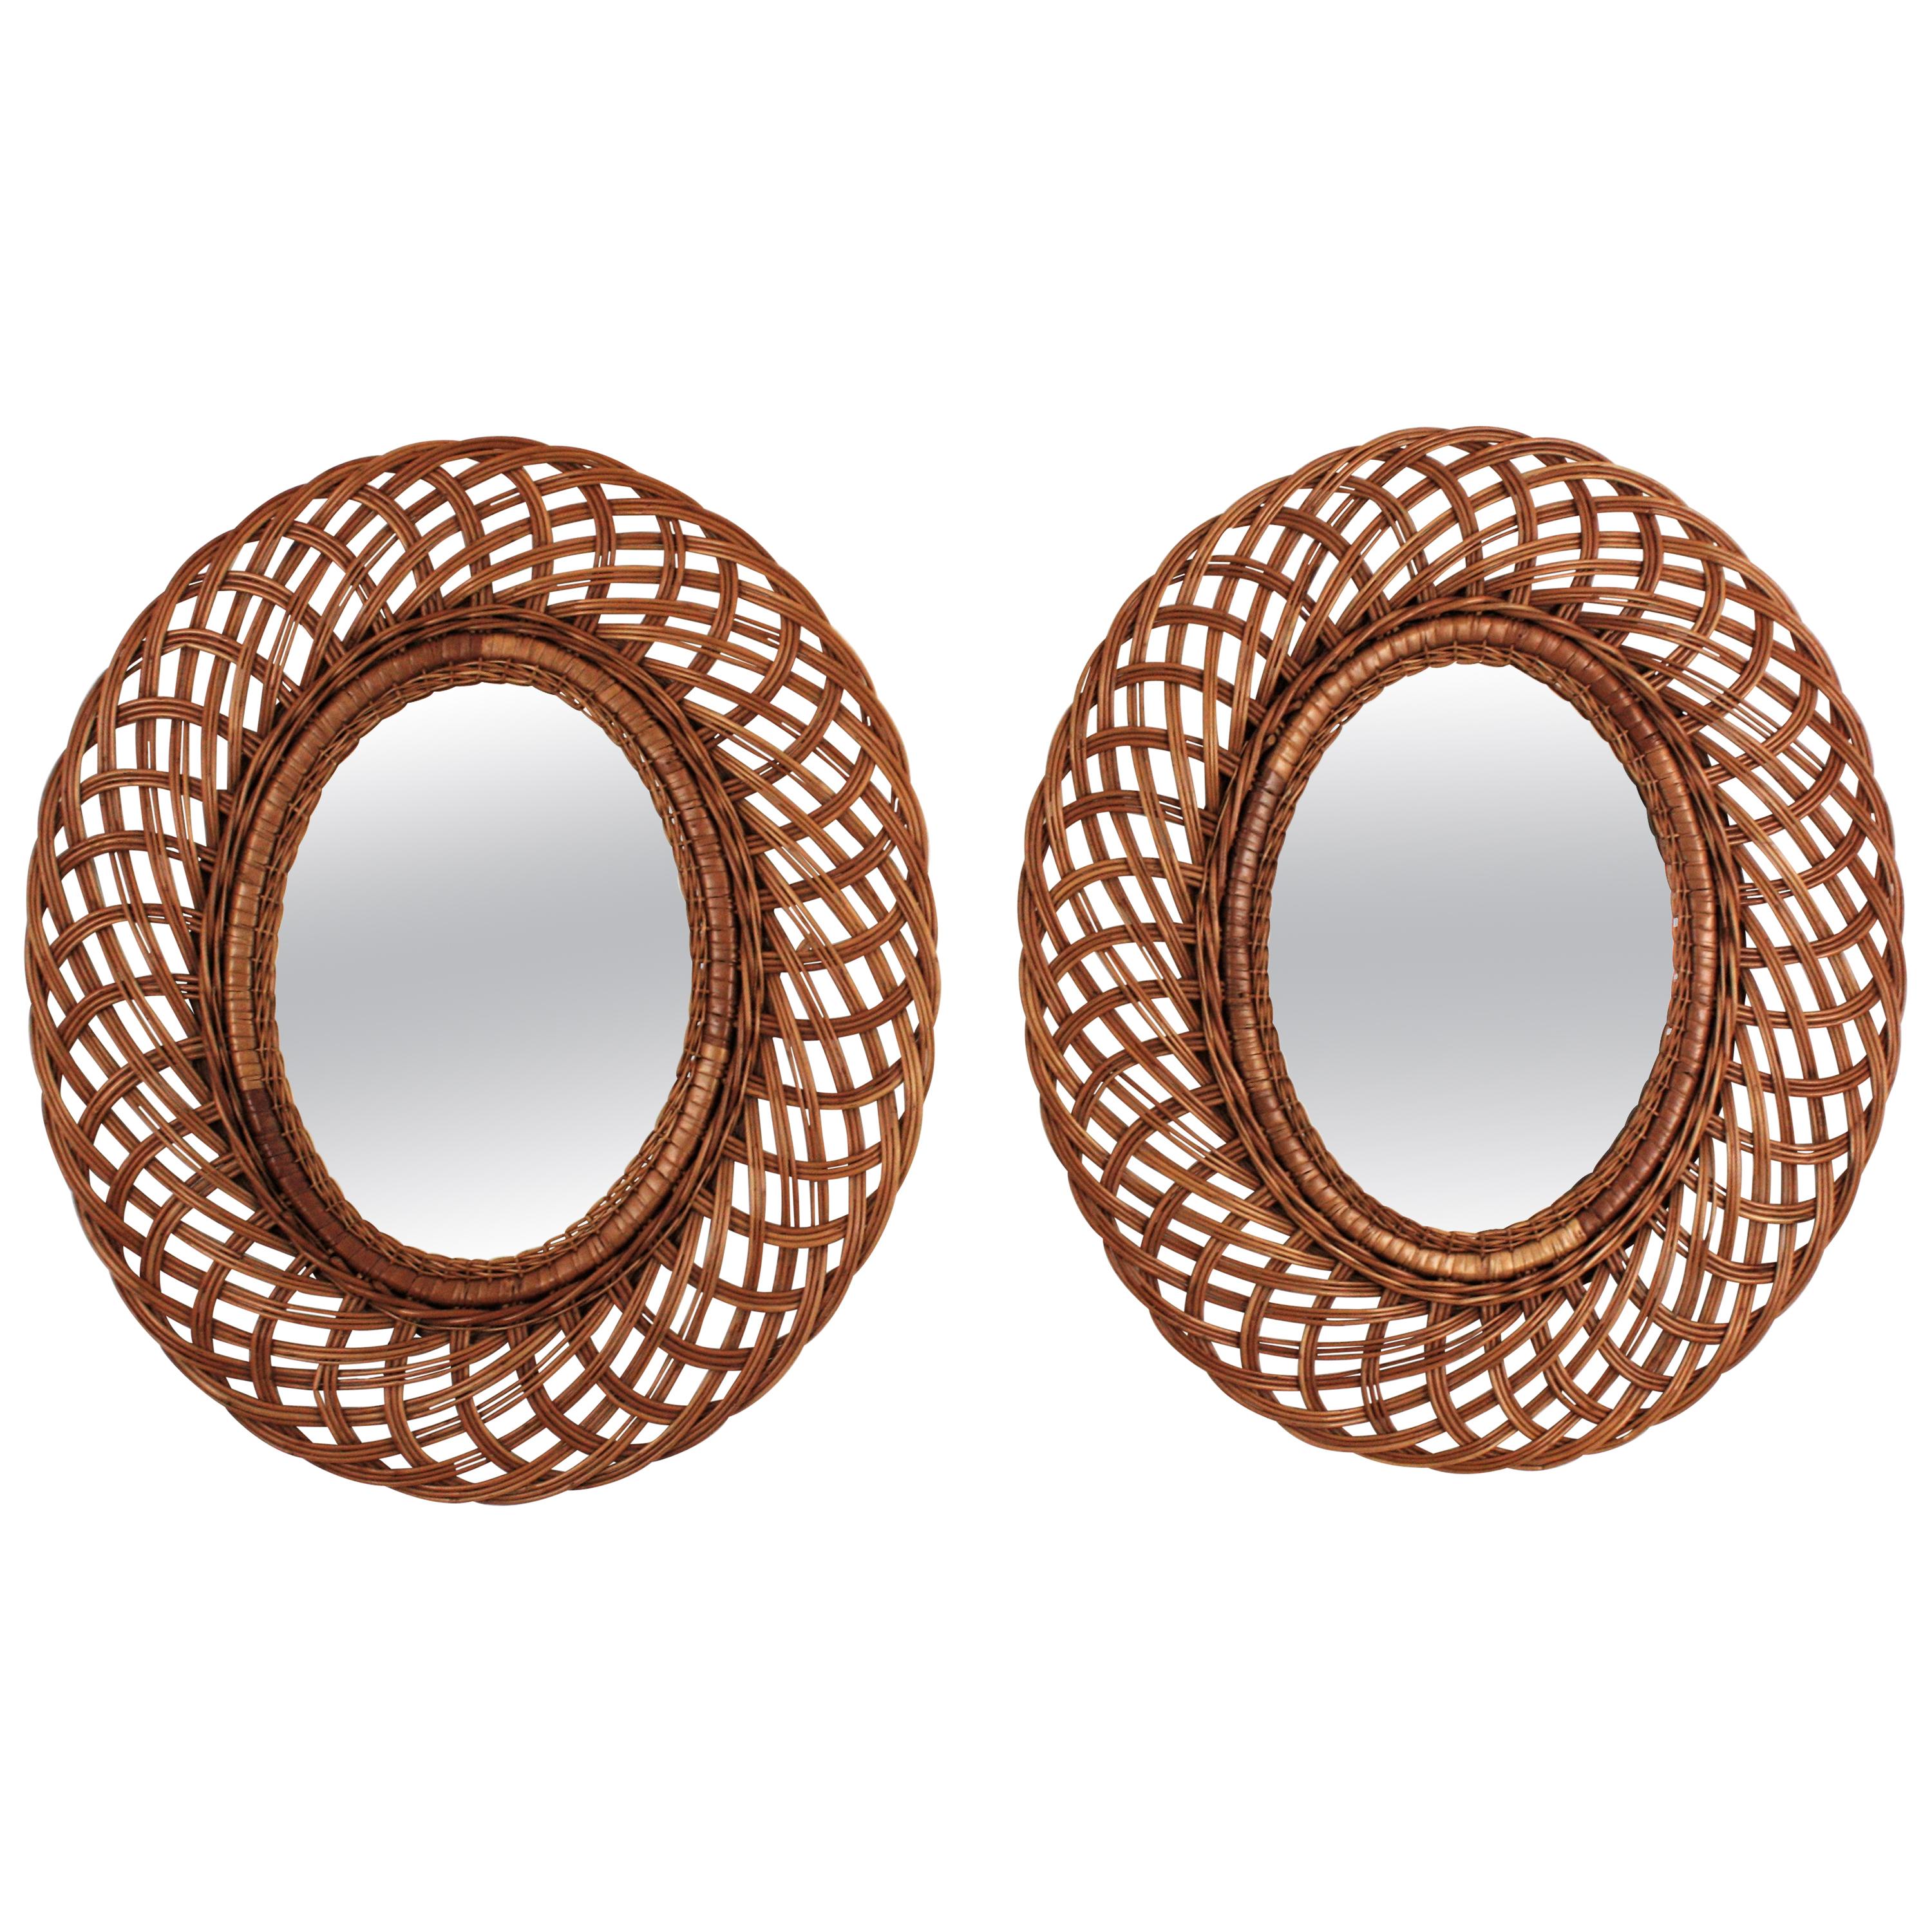 Pair of Rattan and Wicker Oval Mirrors, Spain, 1960s